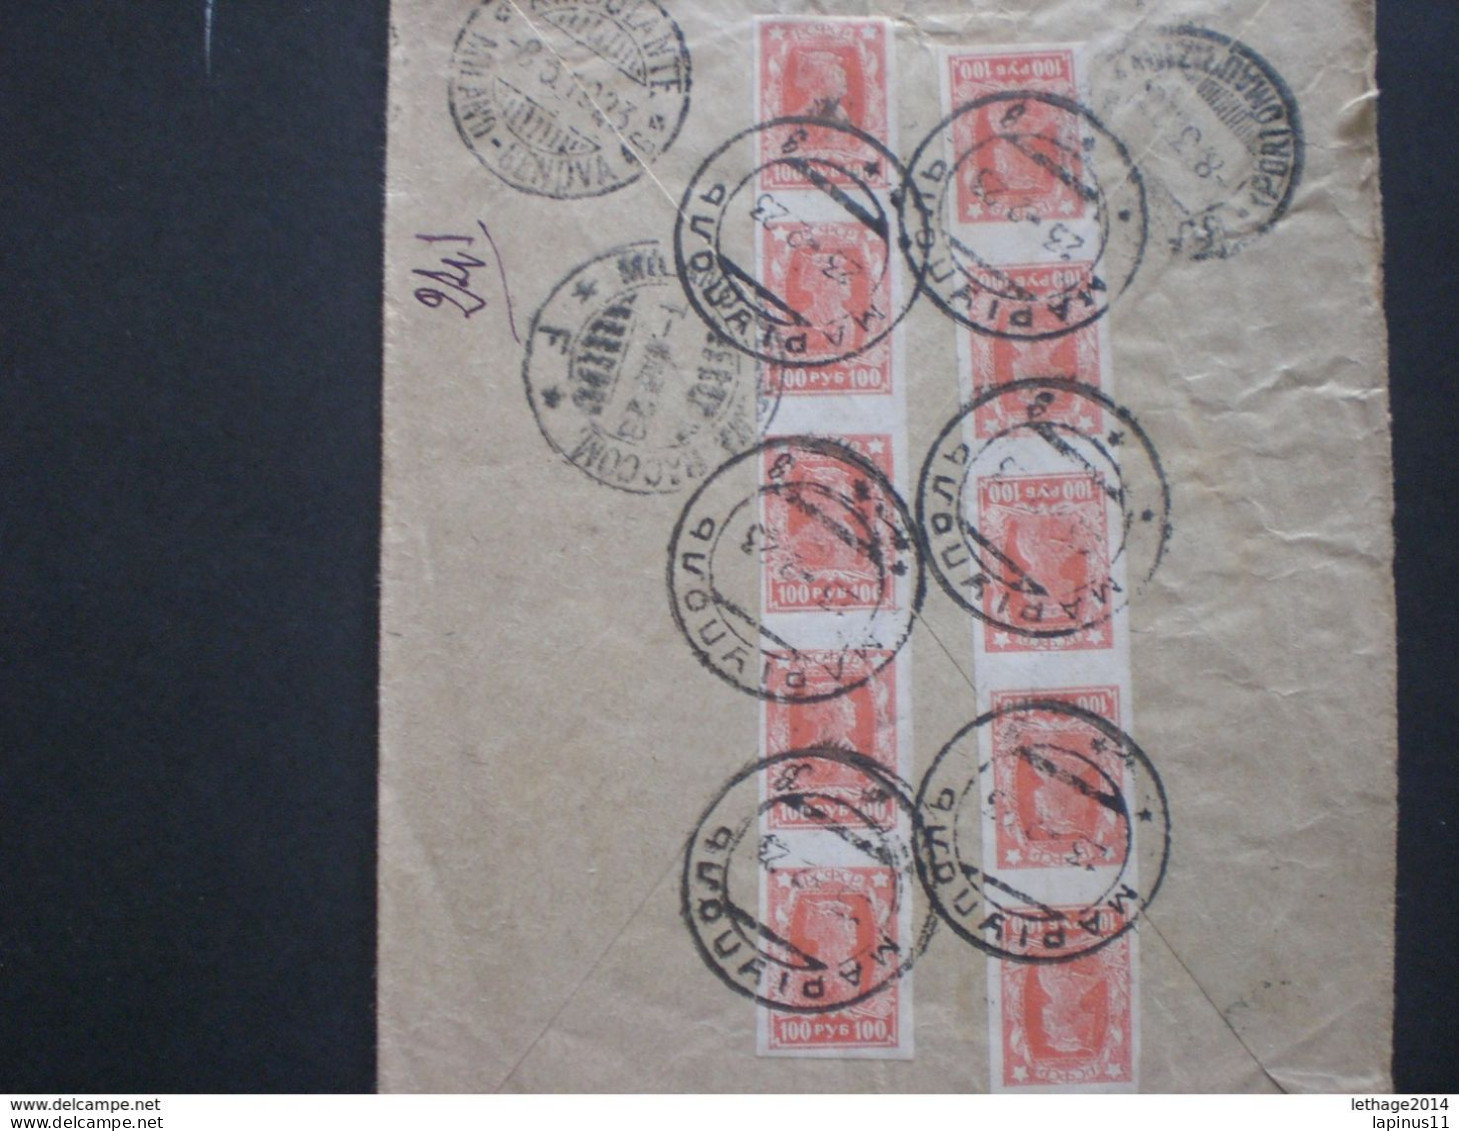 RUSSIA RUSSIE РОССИЯ STAMPS COVER 1923 REGISTER MAIL RUSSLAND TO ITALY OVER STAMPS RRR RIF. TAGG (178) - Storia Postale